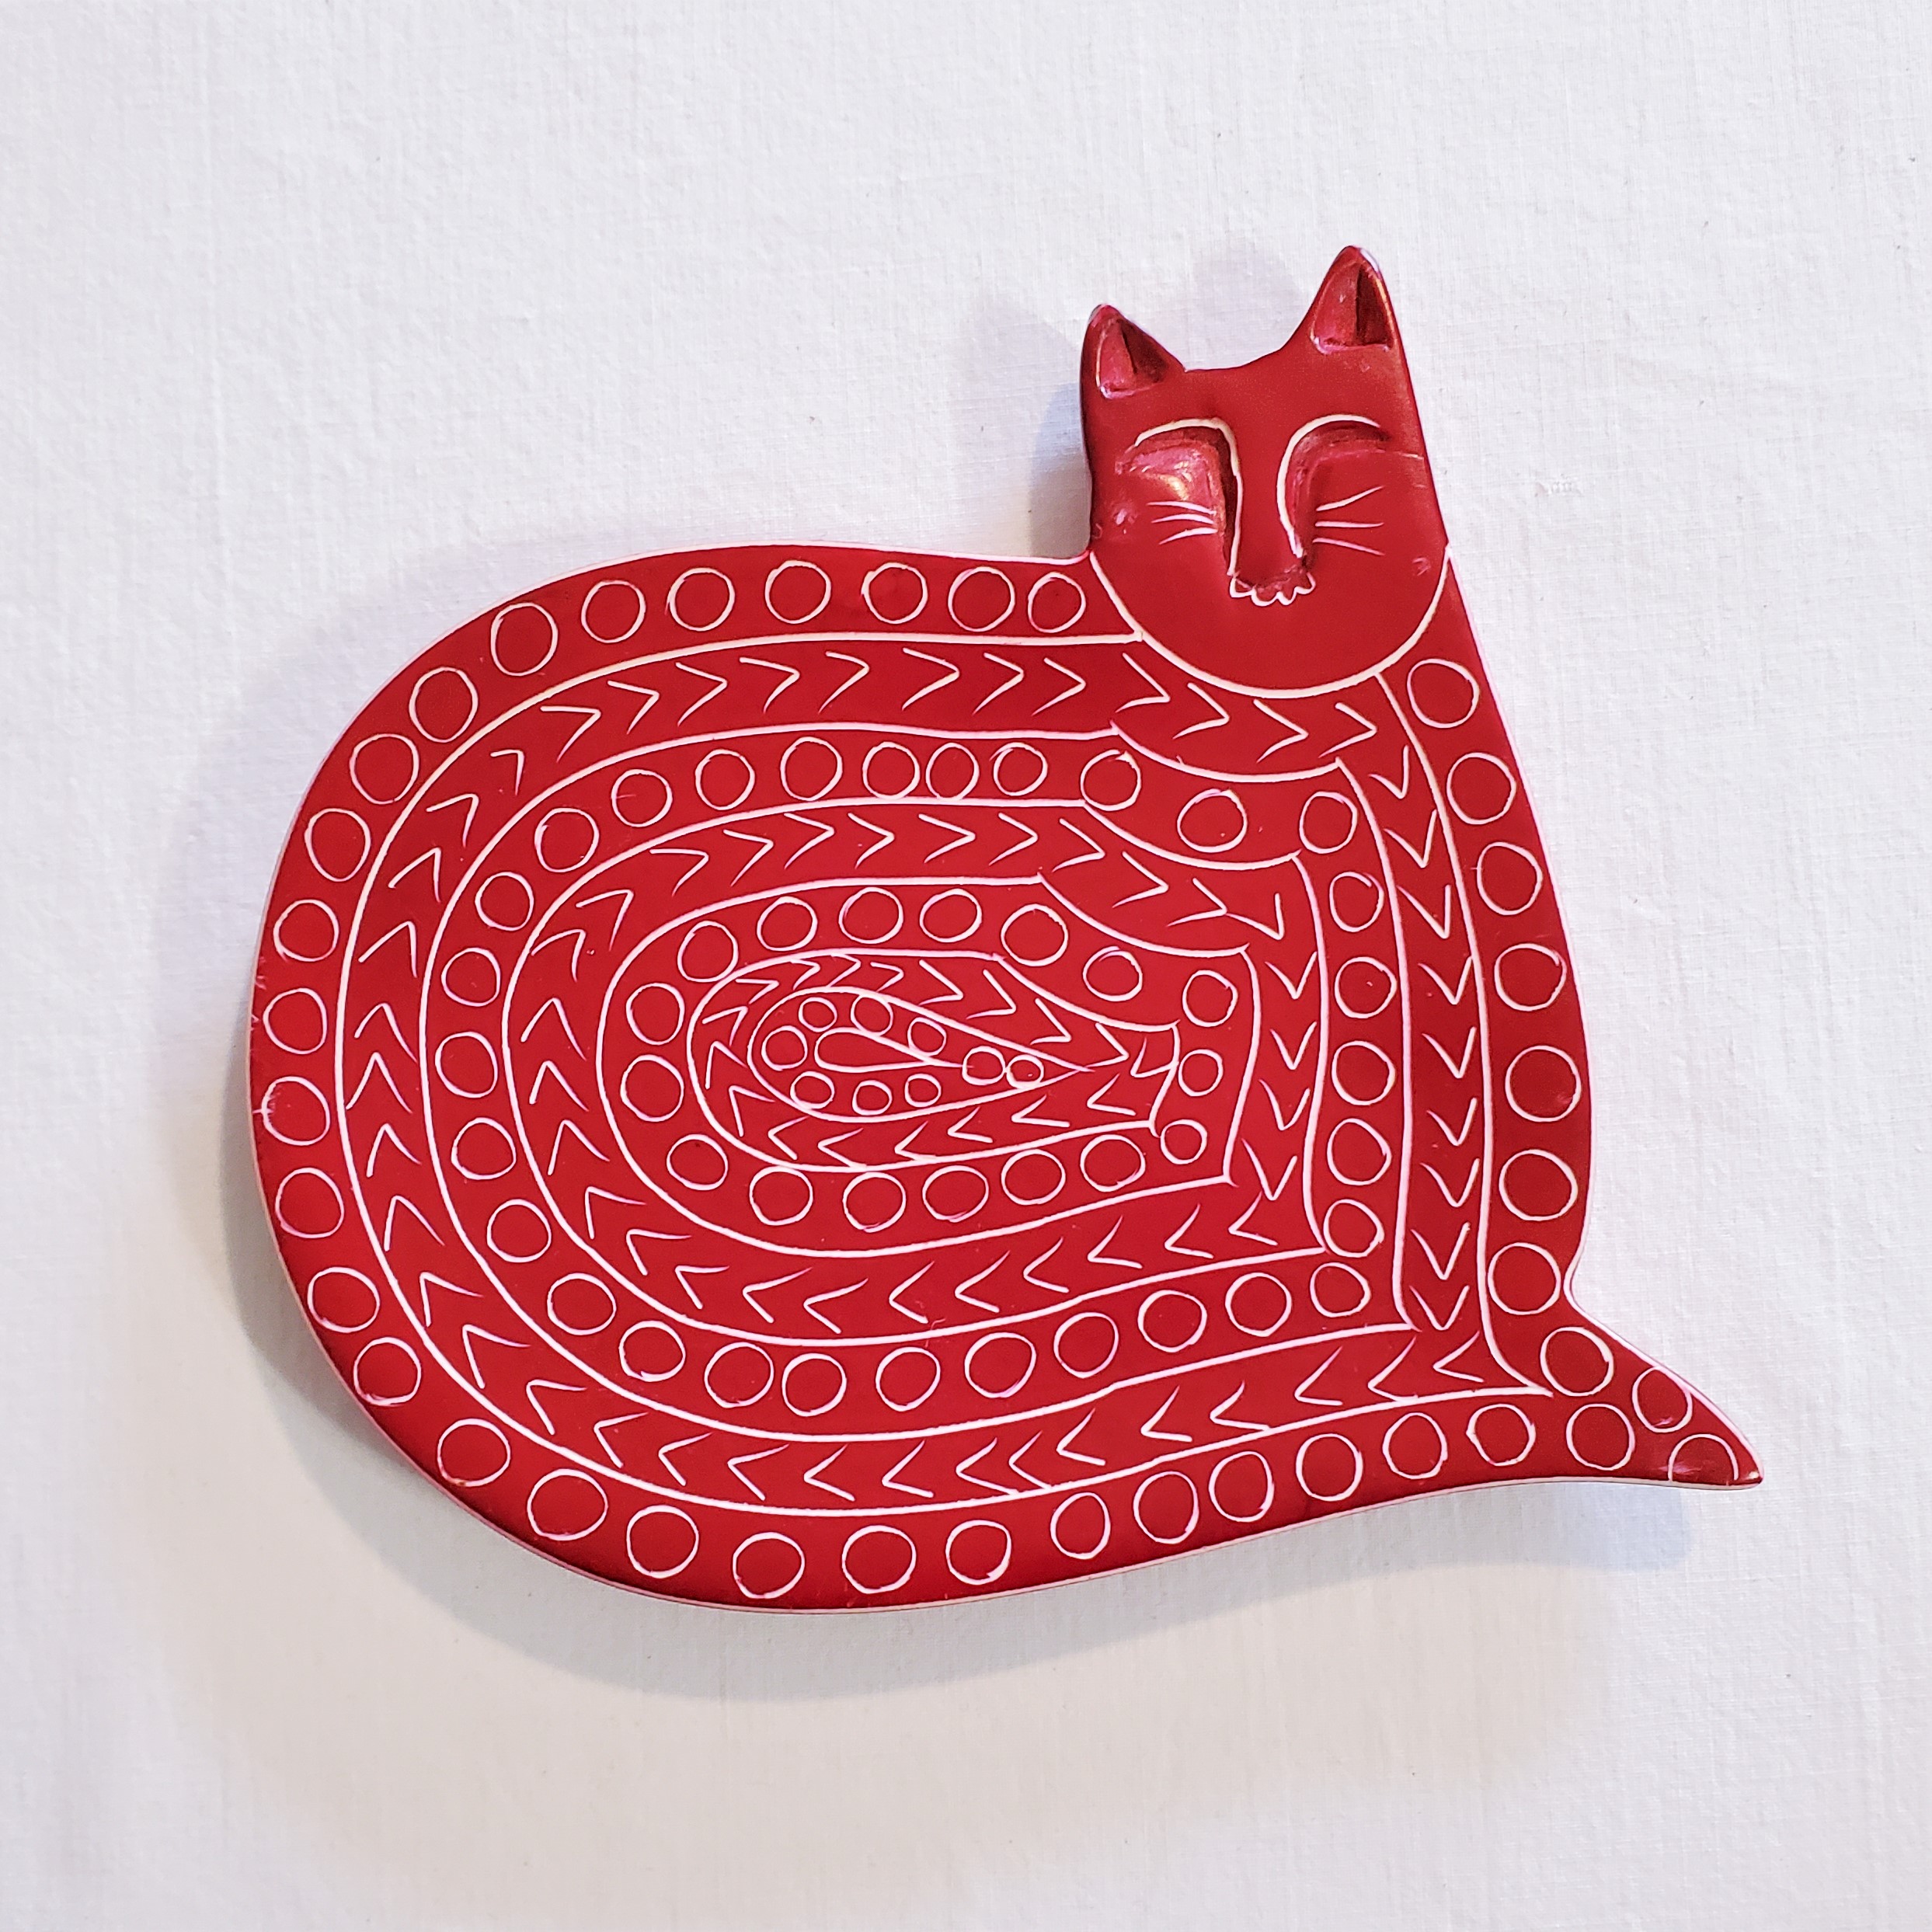 rotation forgænger Katedral Carved Soapstone Red Cat Plate from Kenya - The Silk Road Fair Trade Market